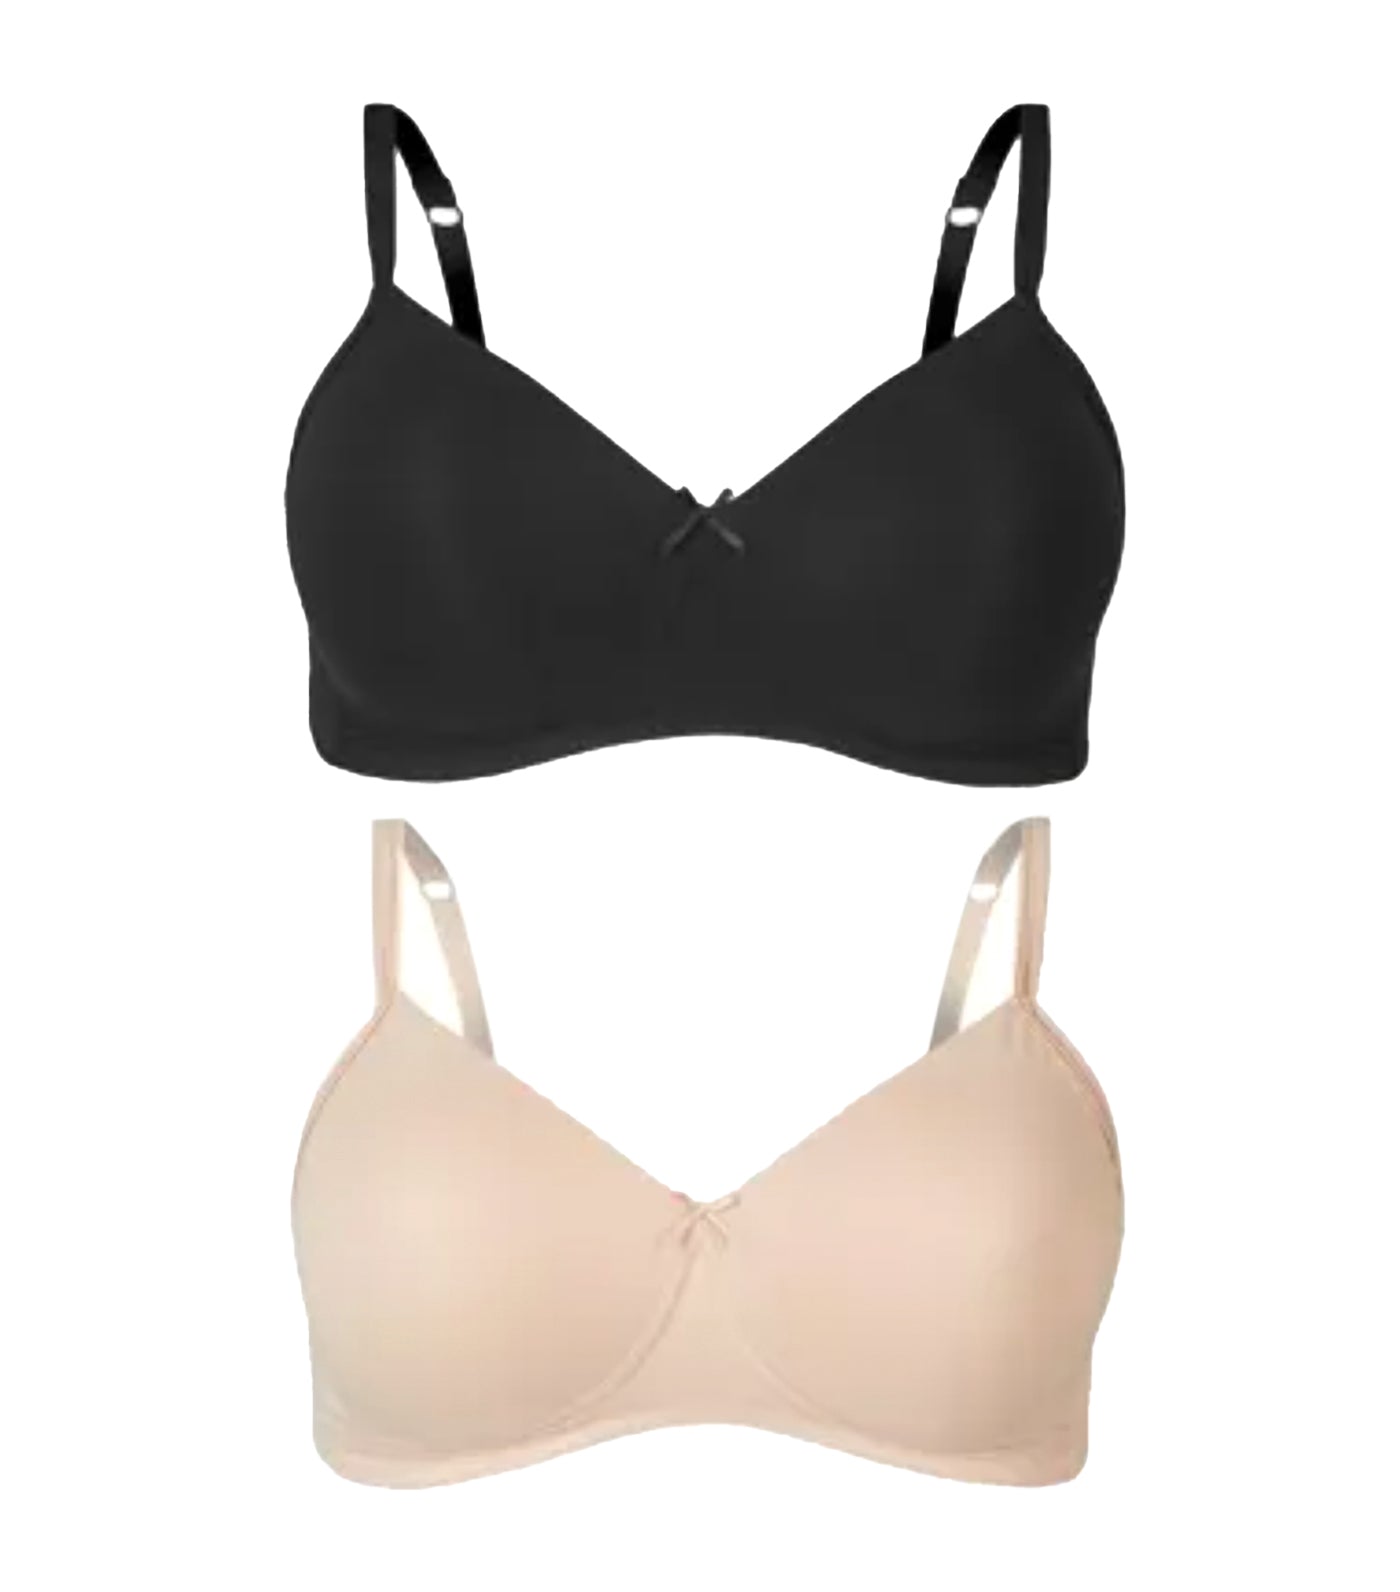 Marks & Spencer 2 Pack Cotton Rich Padded Full Cup Bras - Black and Beige